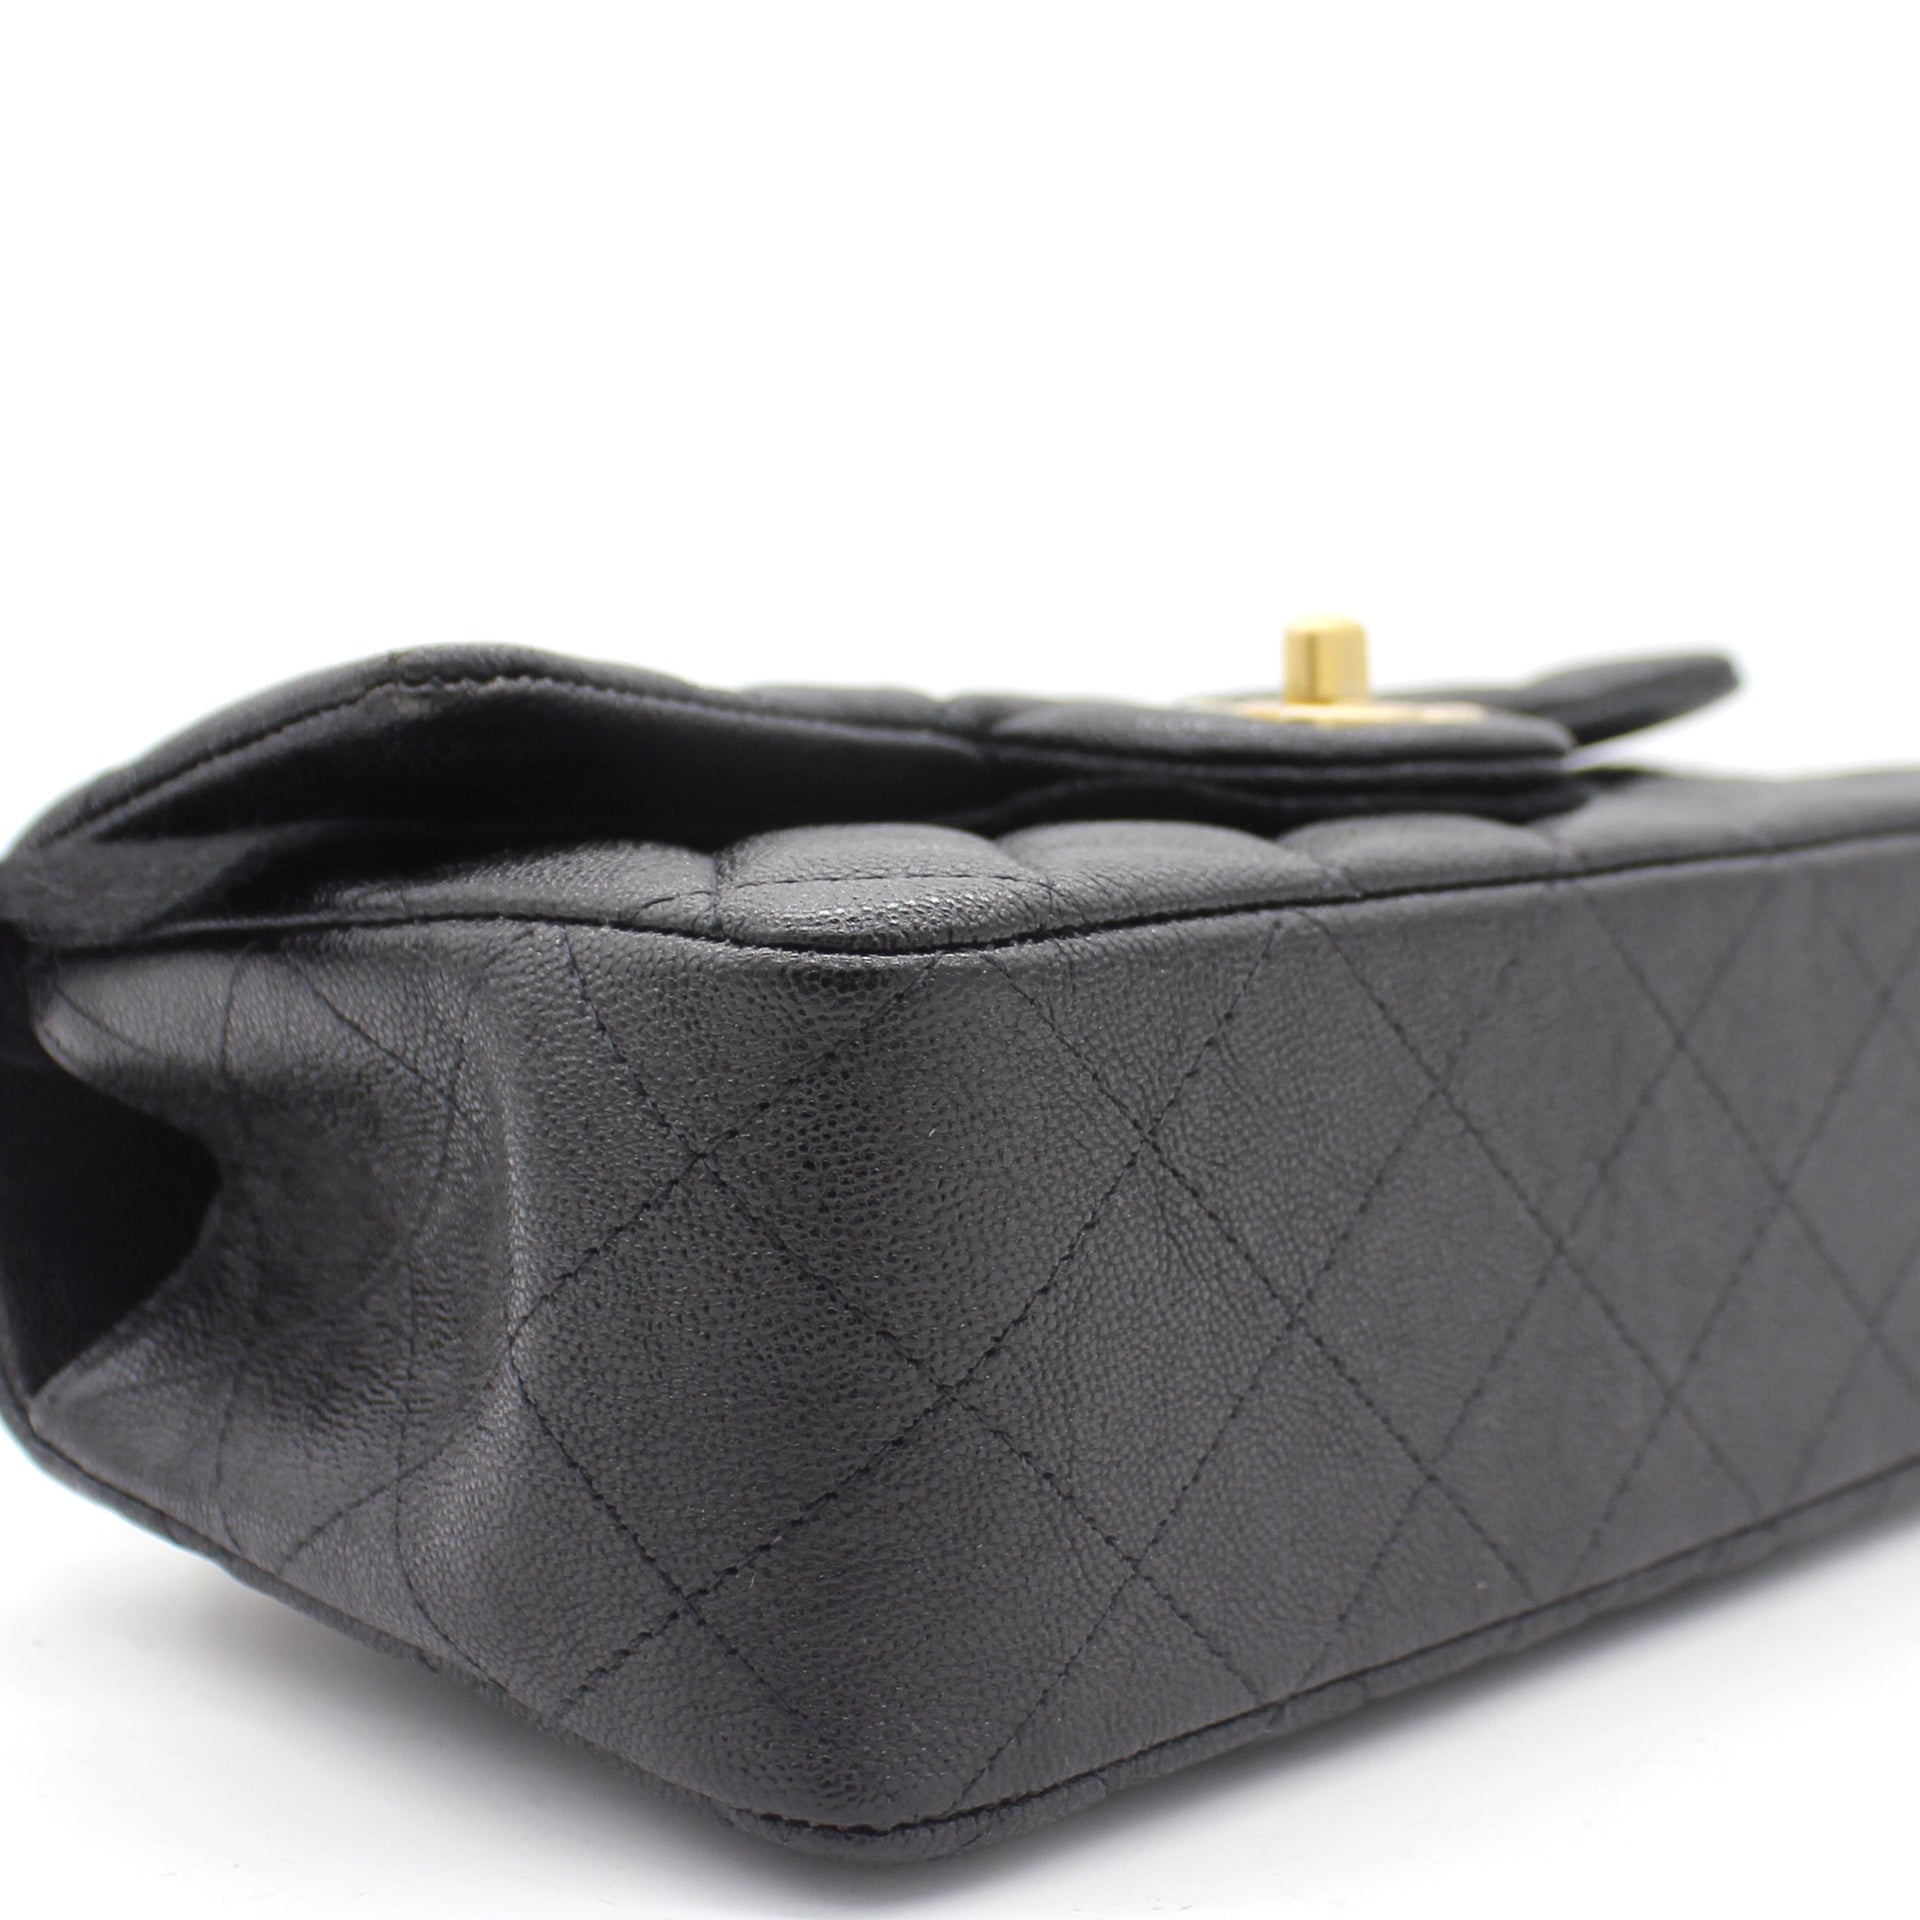 Mini Flap Bag With Top Handle